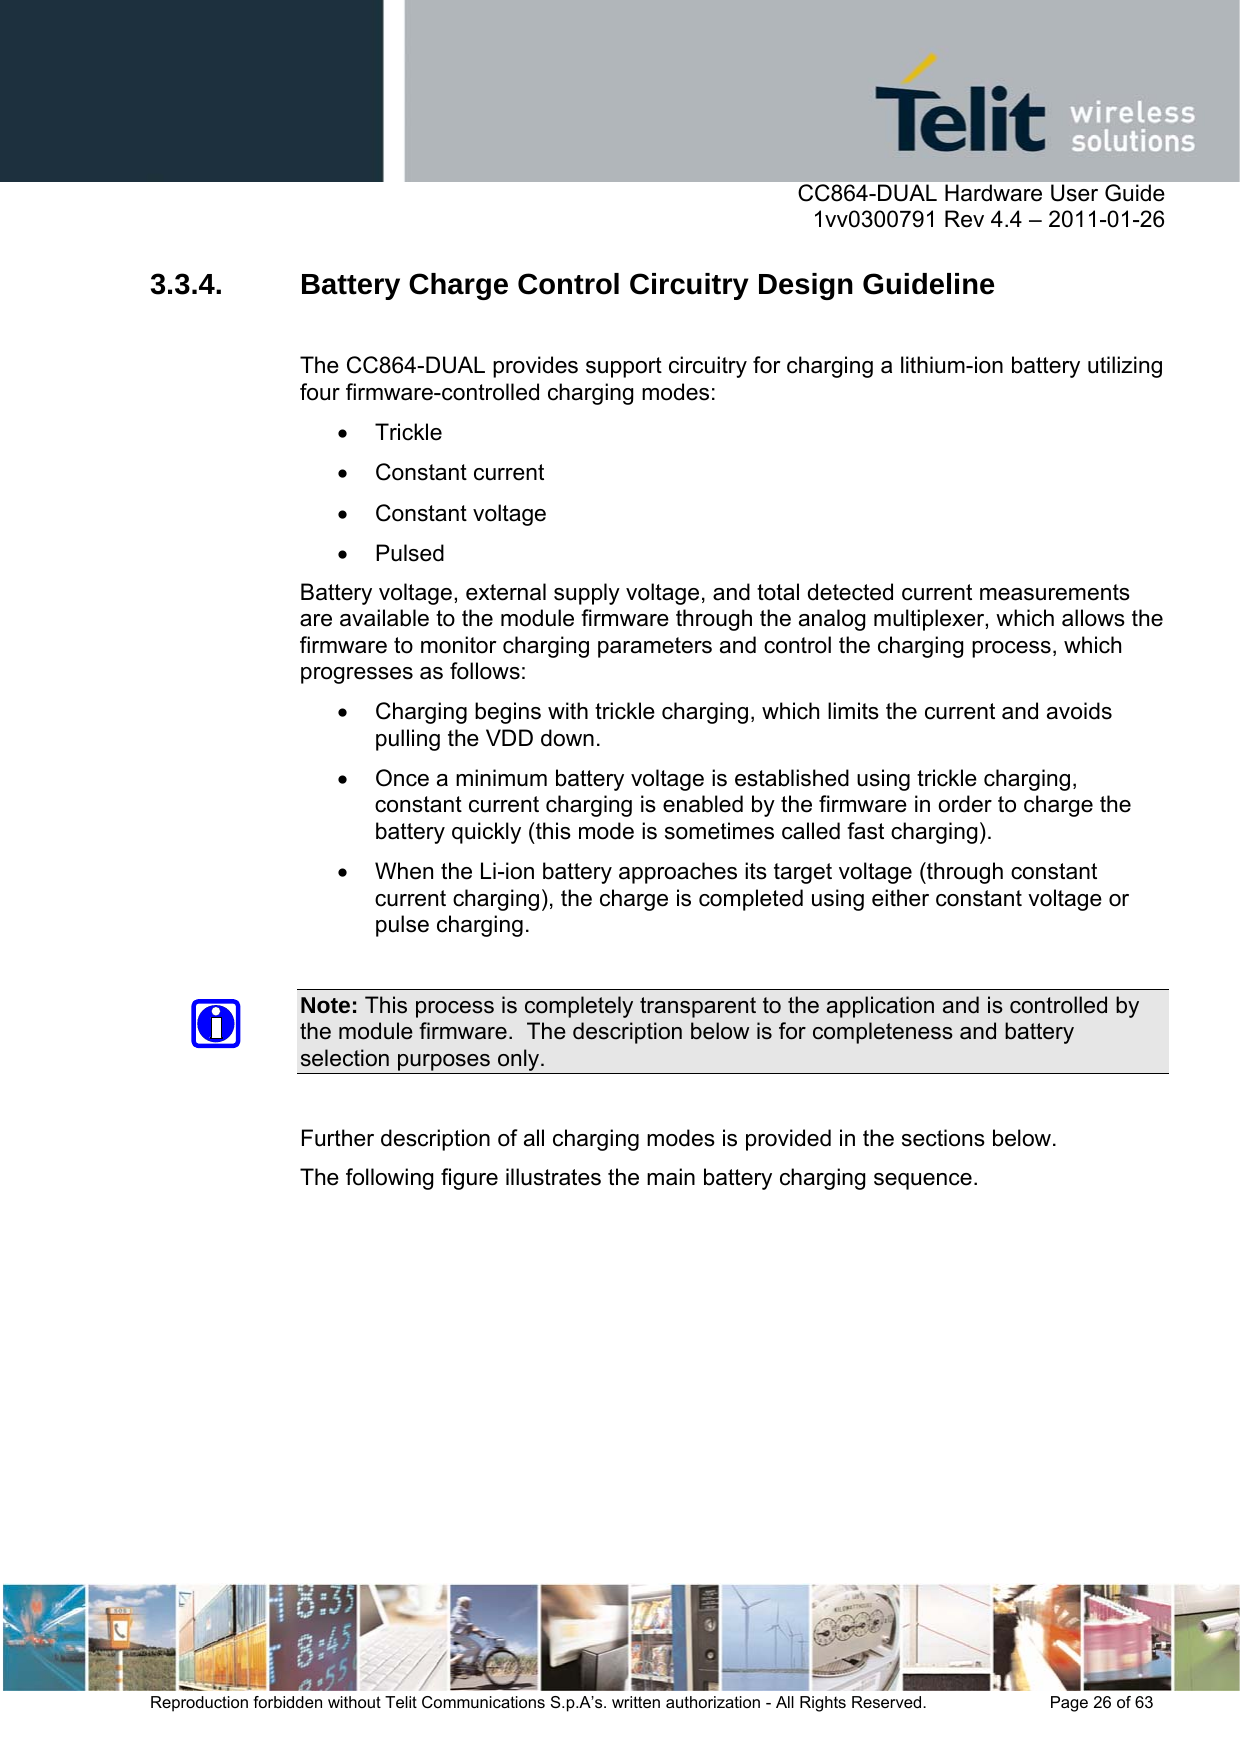      CC864-DUAL Hardware User Guide    1vv0300791 Rev 4.4 – 2011-01-26  Reproduction forbidden without Telit Communications S.p.A’s. written authorization - All Rights Reserved.    Page 26 of 63  3.3.4.  Battery Charge Control Circuitry Design Guideline  The CC864-DUAL provides support circuitry for charging a lithium-ion battery utilizing four firmware-controlled charging modes:  Trickle   Constant current  Constant voltage  Pulsed Battery voltage, external supply voltage, and total detected current measurements are available to the module firmware through the analog multiplexer, which allows the firmware to monitor charging parameters and control the charging process, which progresses as follows:   Charging begins with trickle charging, which limits the current and avoids pulling the VDD down.    Once a minimum battery voltage is established using trickle charging, constant current charging is enabled by the firmware in order to charge the battery quickly (this mode is sometimes called fast charging).    When the Li-ion battery approaches its target voltage (through constant current charging), the charge is completed using either constant voltage or pulse charging.  Note: This process is completely transparent to the application and is controlled by the module firmware.  The description below is for completeness and battery selection purposes only.  Further description of all charging modes is provided in the sections below. The following figure illustrates the main battery charging sequence.  